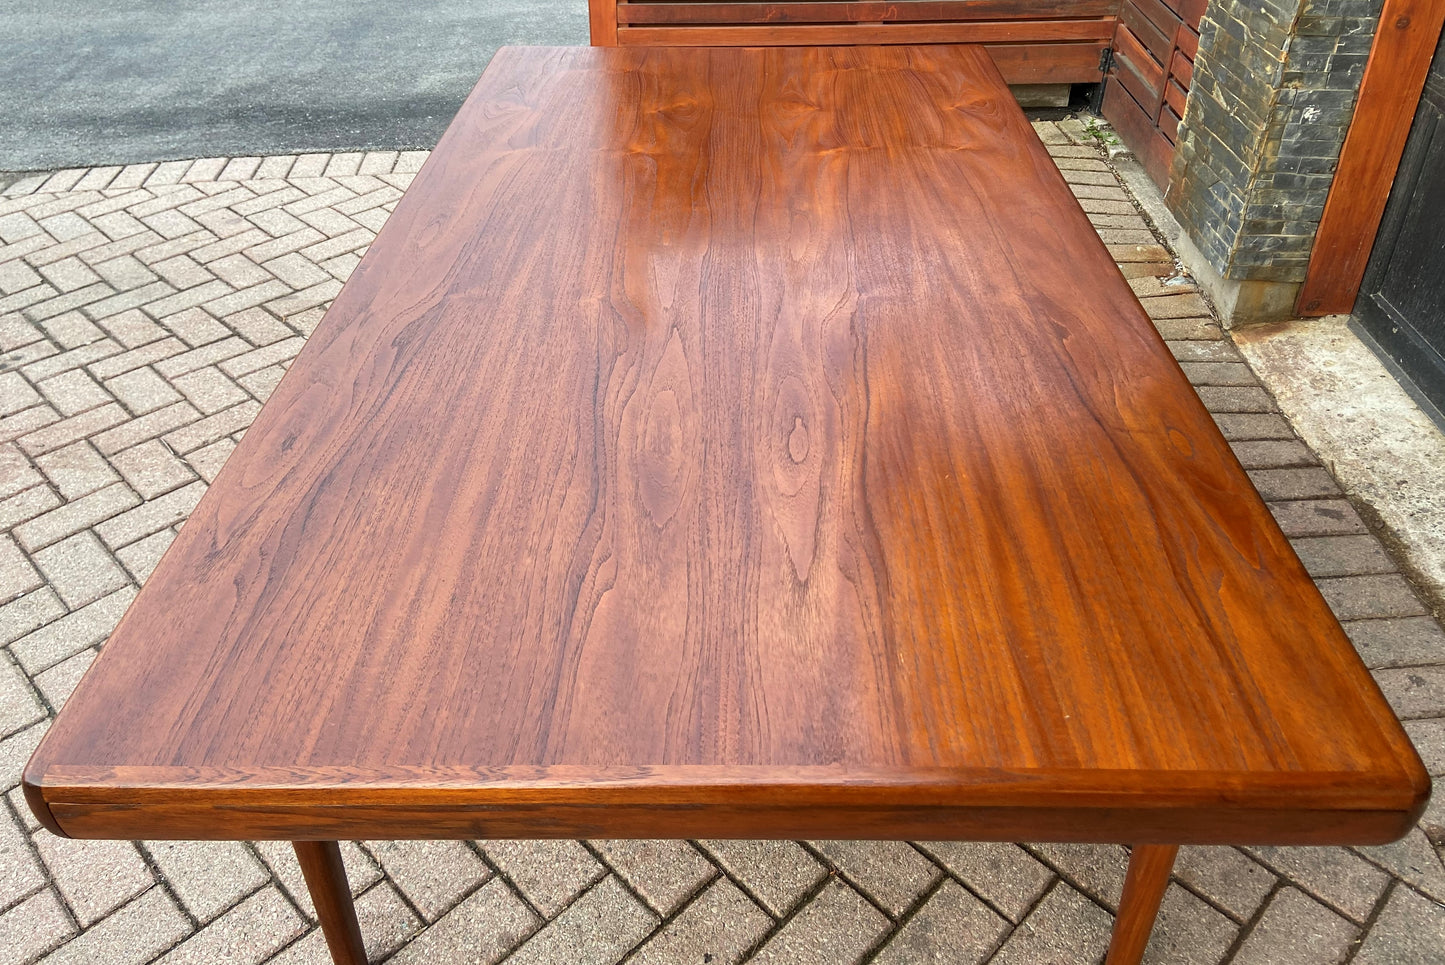 Sold***REFINISHED Danish MCM Teak Draw Leaf Table by Ib Kofod-Larsen for Faarup, 6 ft- 98"